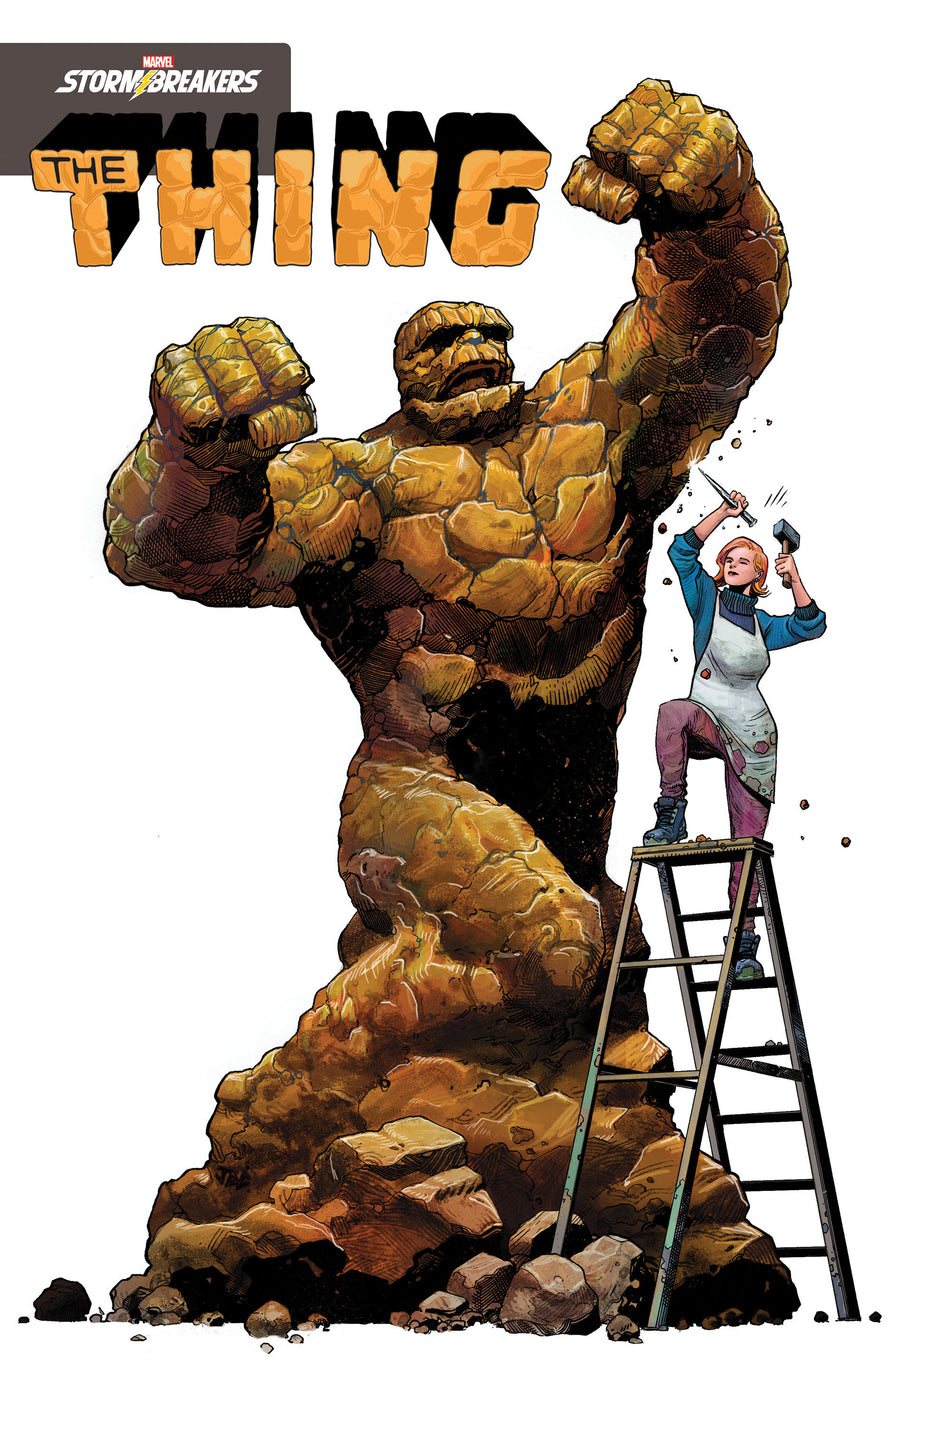 Image of The Thing 4 Cassara Stormbreaker Variant comic sold by Stronghold Collectibles.